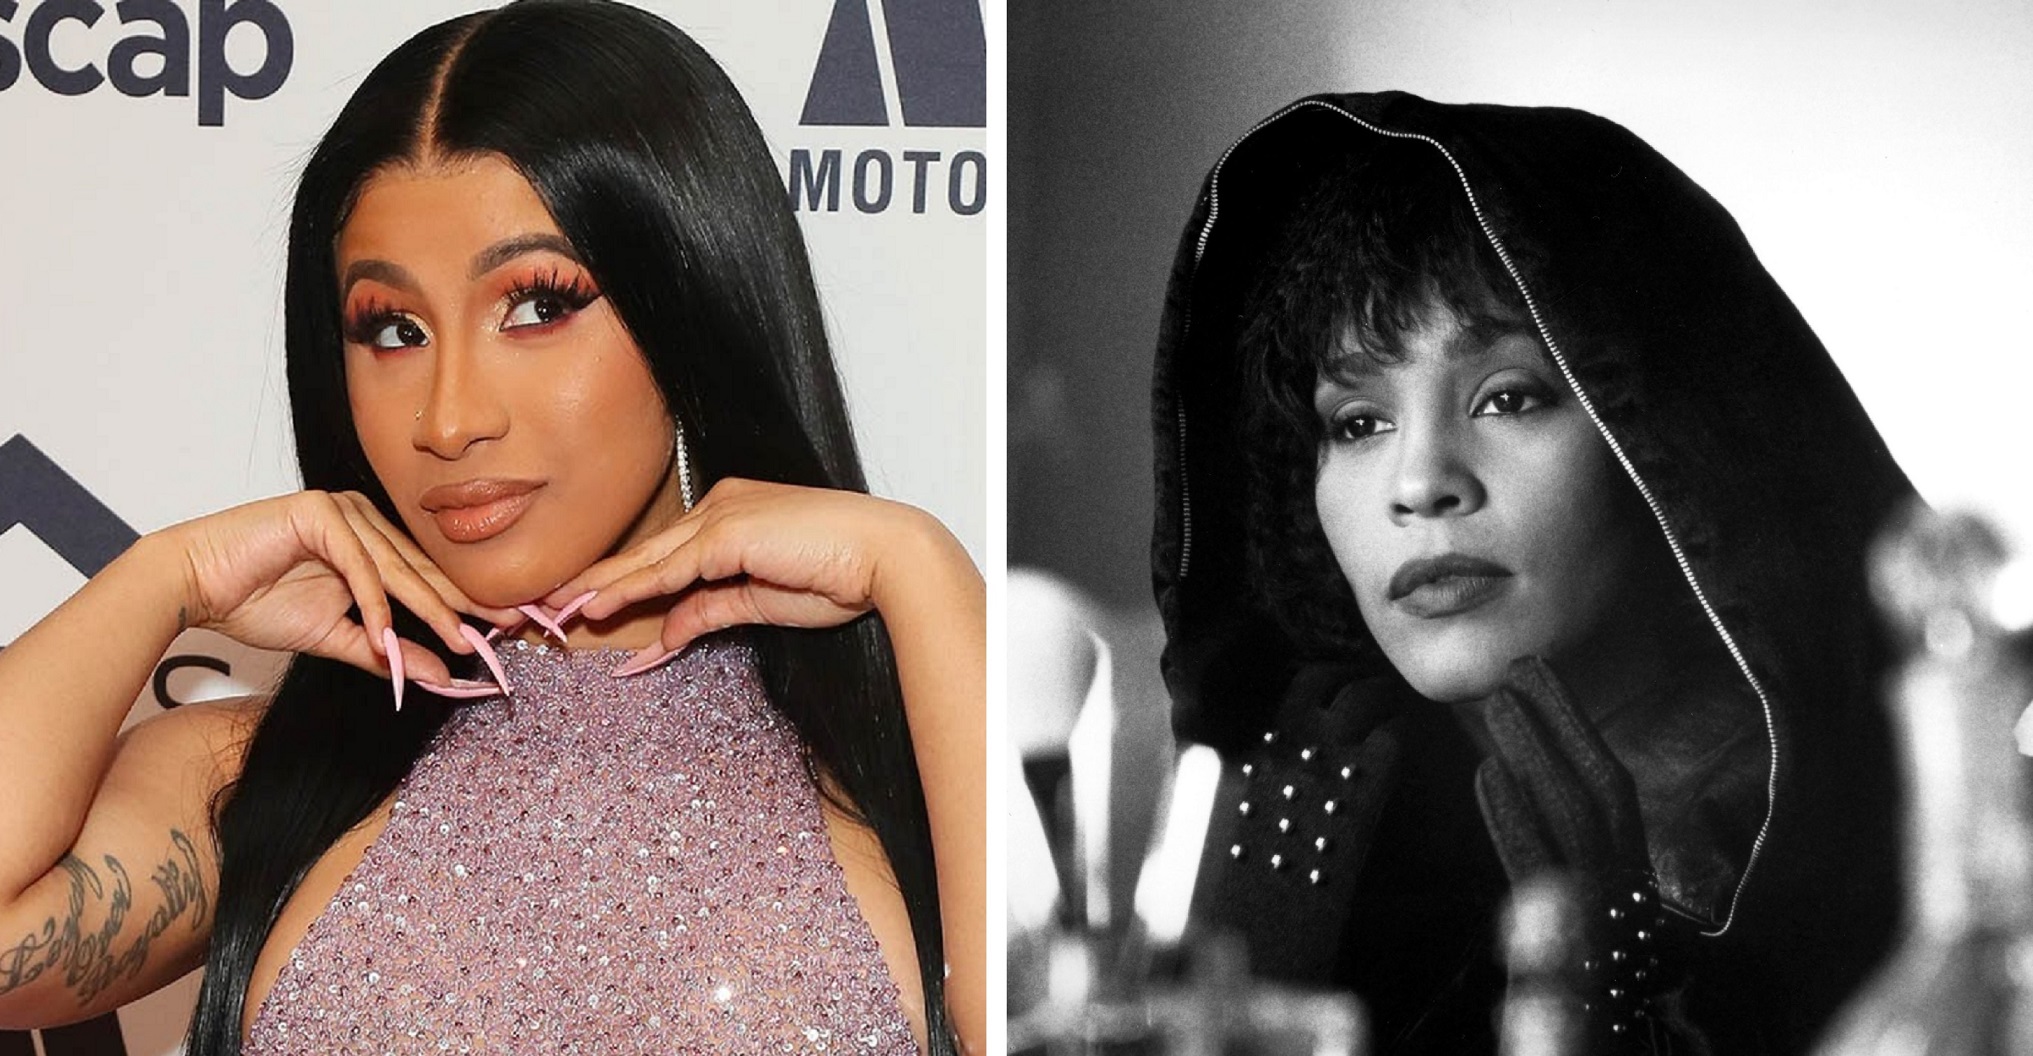 Cardi B Reported To Star in The Bodyguard Remake With Channing Tatum